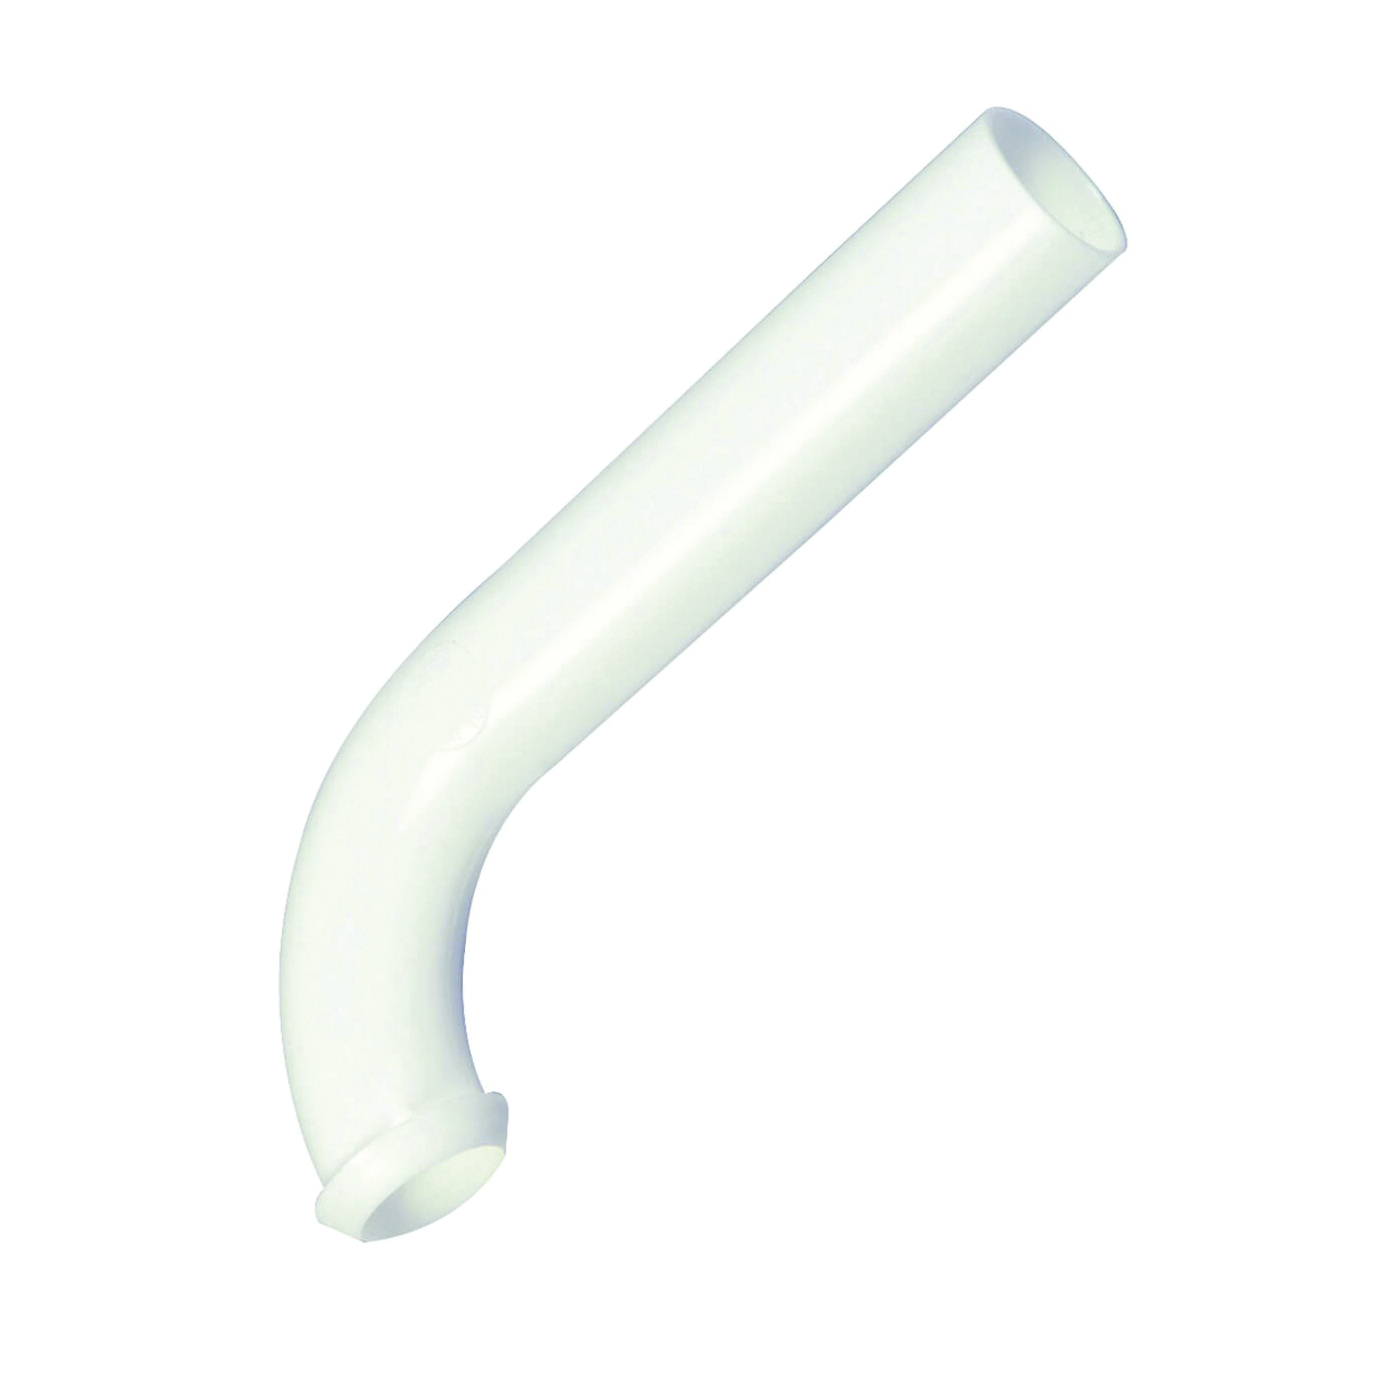 54444 Wall Bend, 1-1/4 in, Ground Joint, Plastic, White